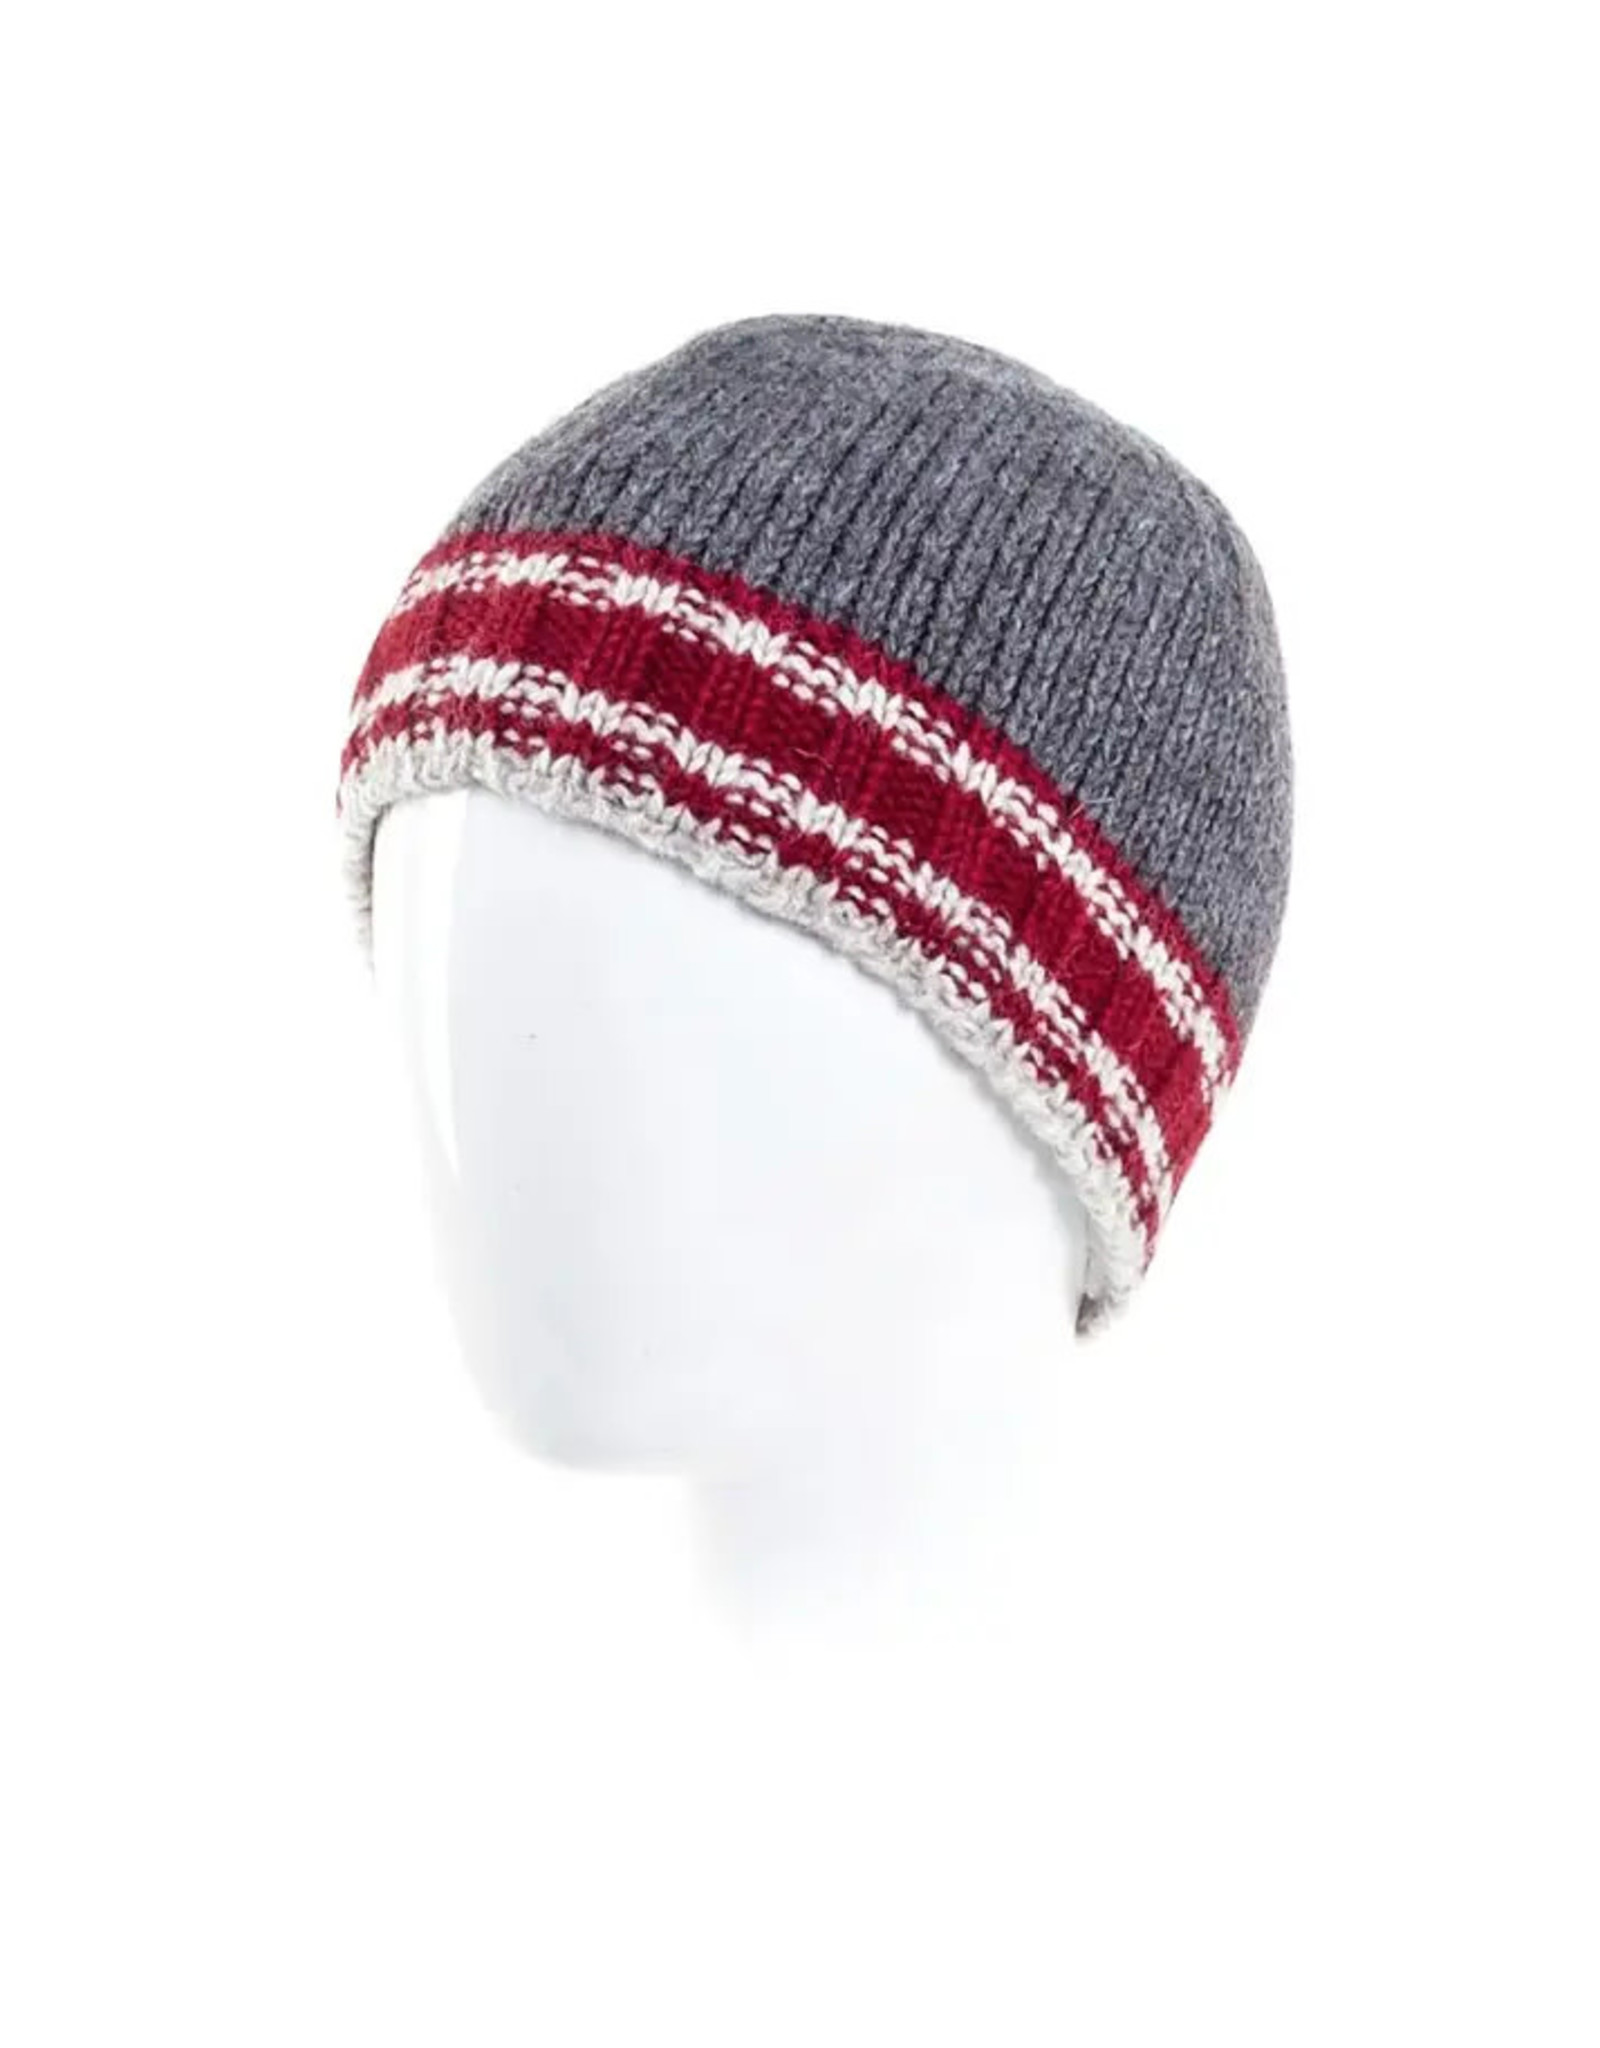 Lost Horizons Bixby Wool Hat (Red)